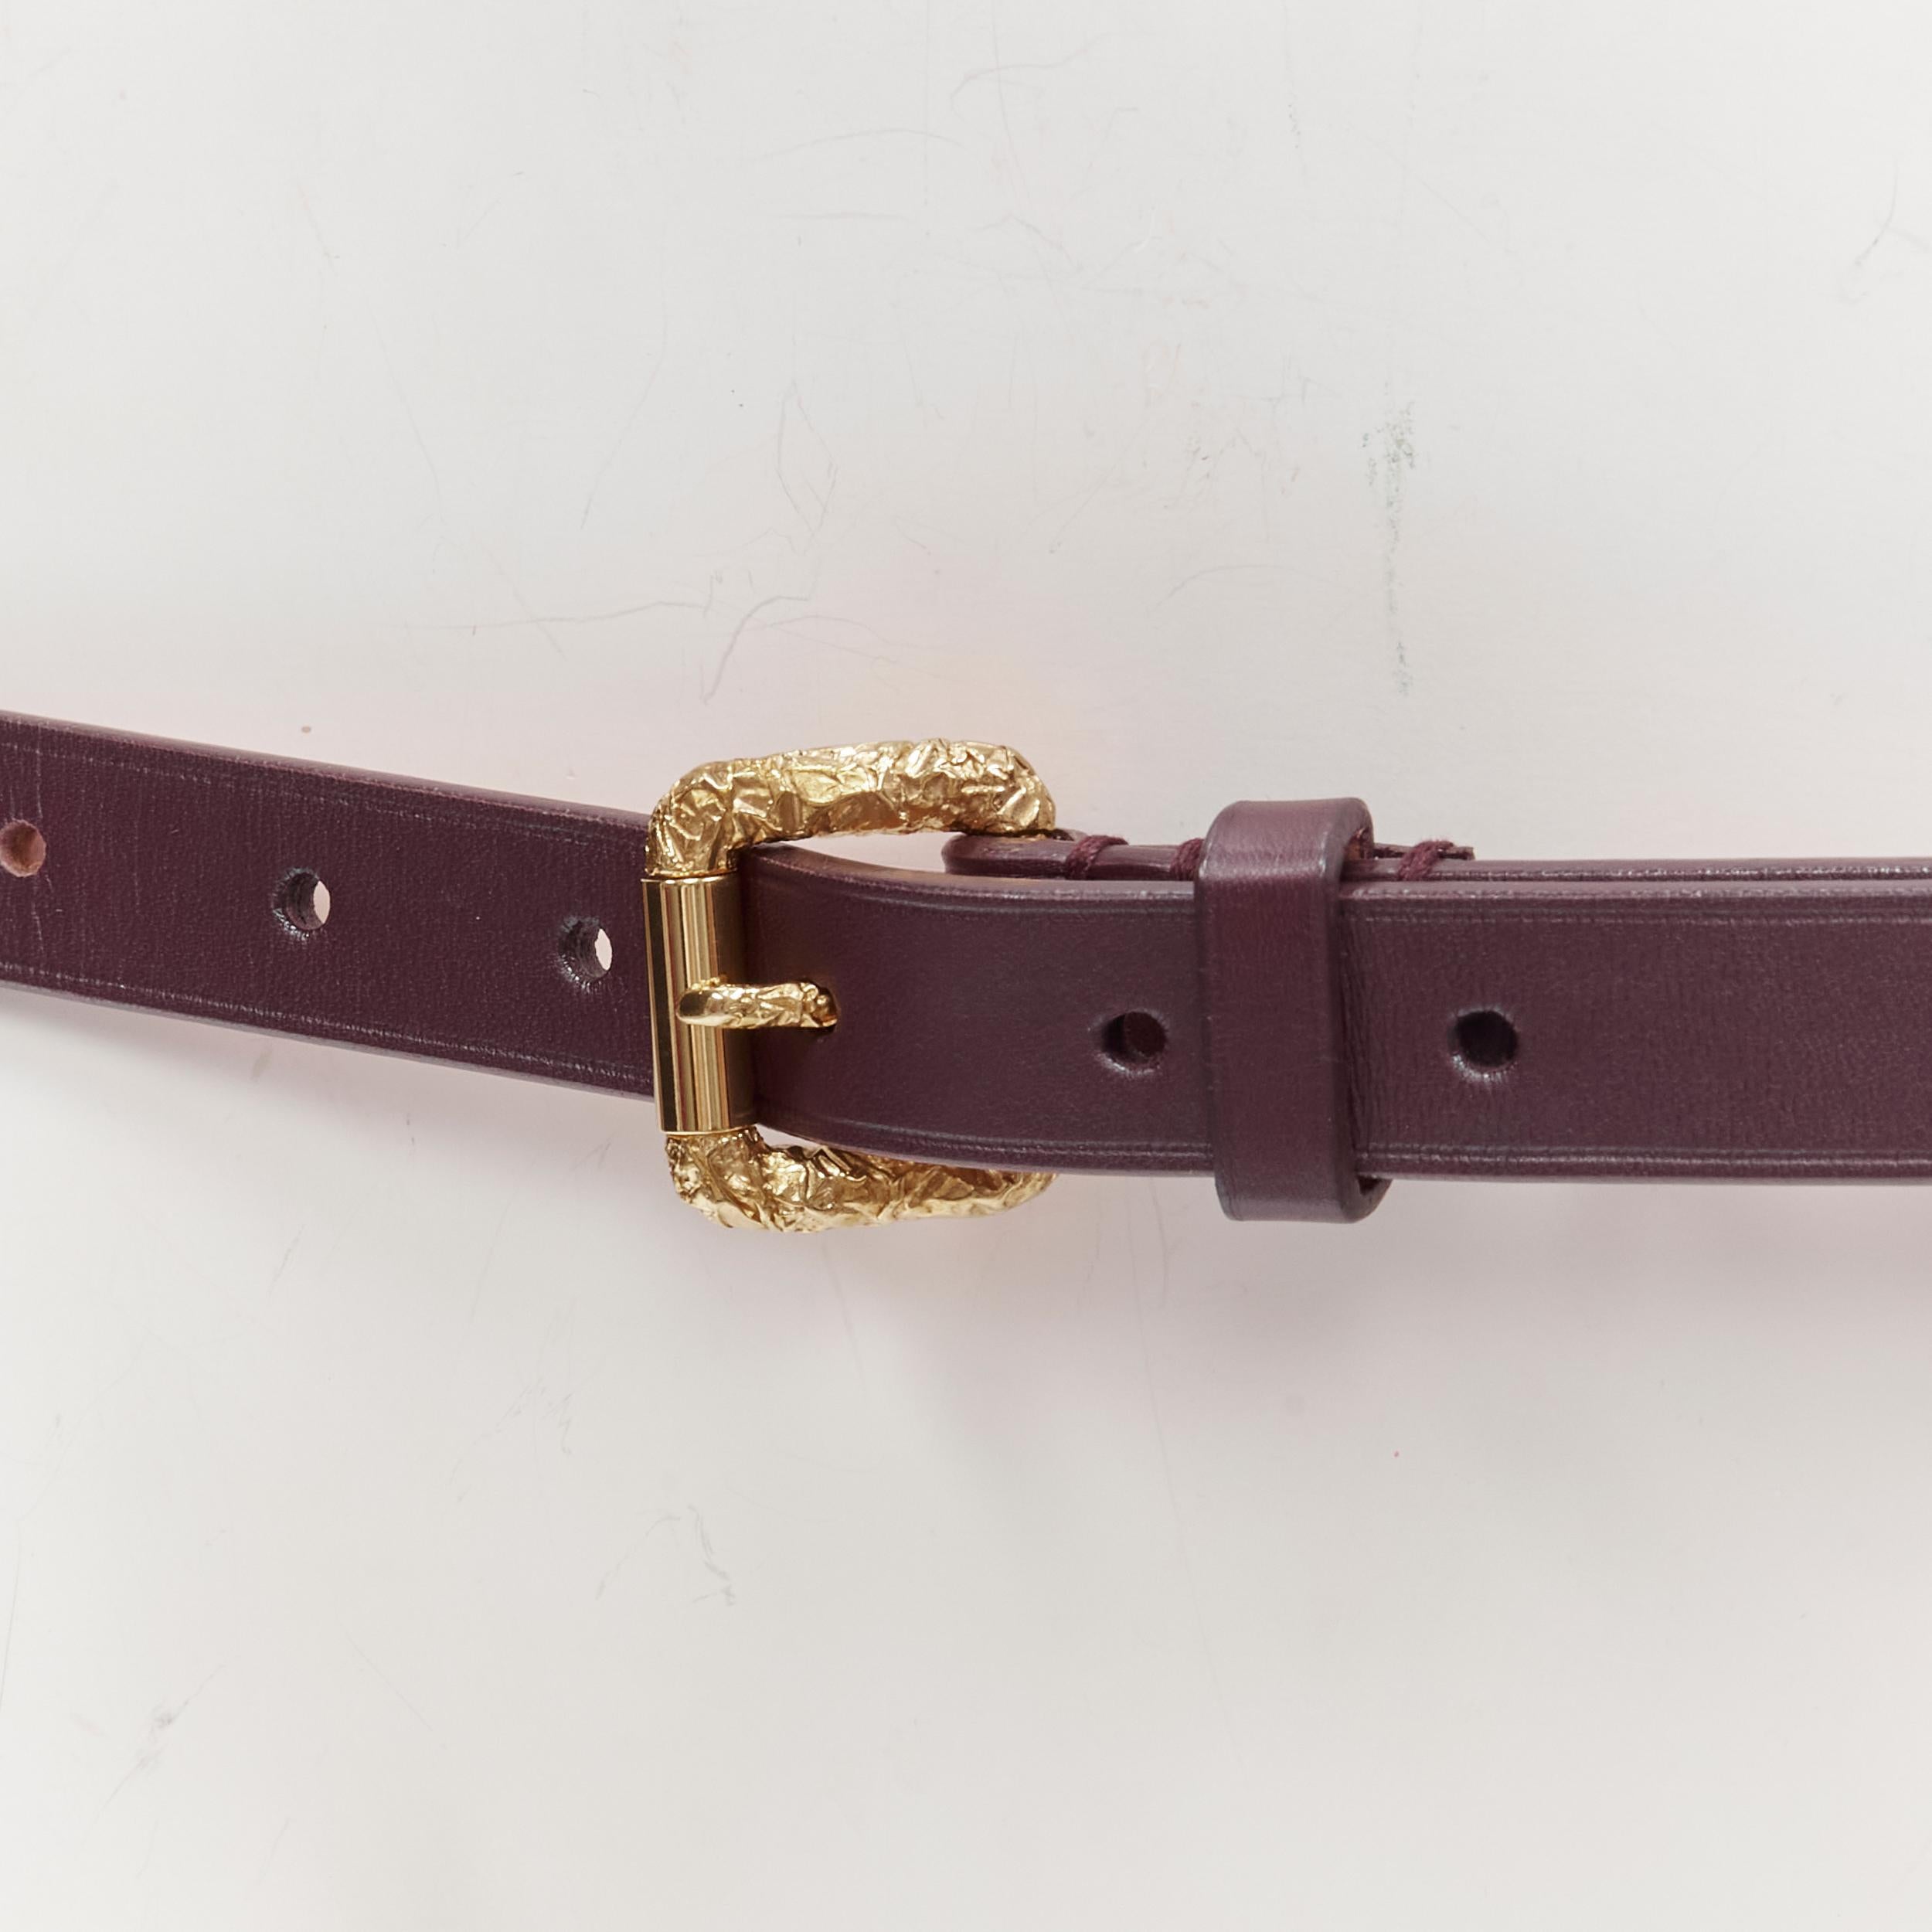 LOUS VUITTON gold tone hammered textured buckle brown leather belt 90cm 36